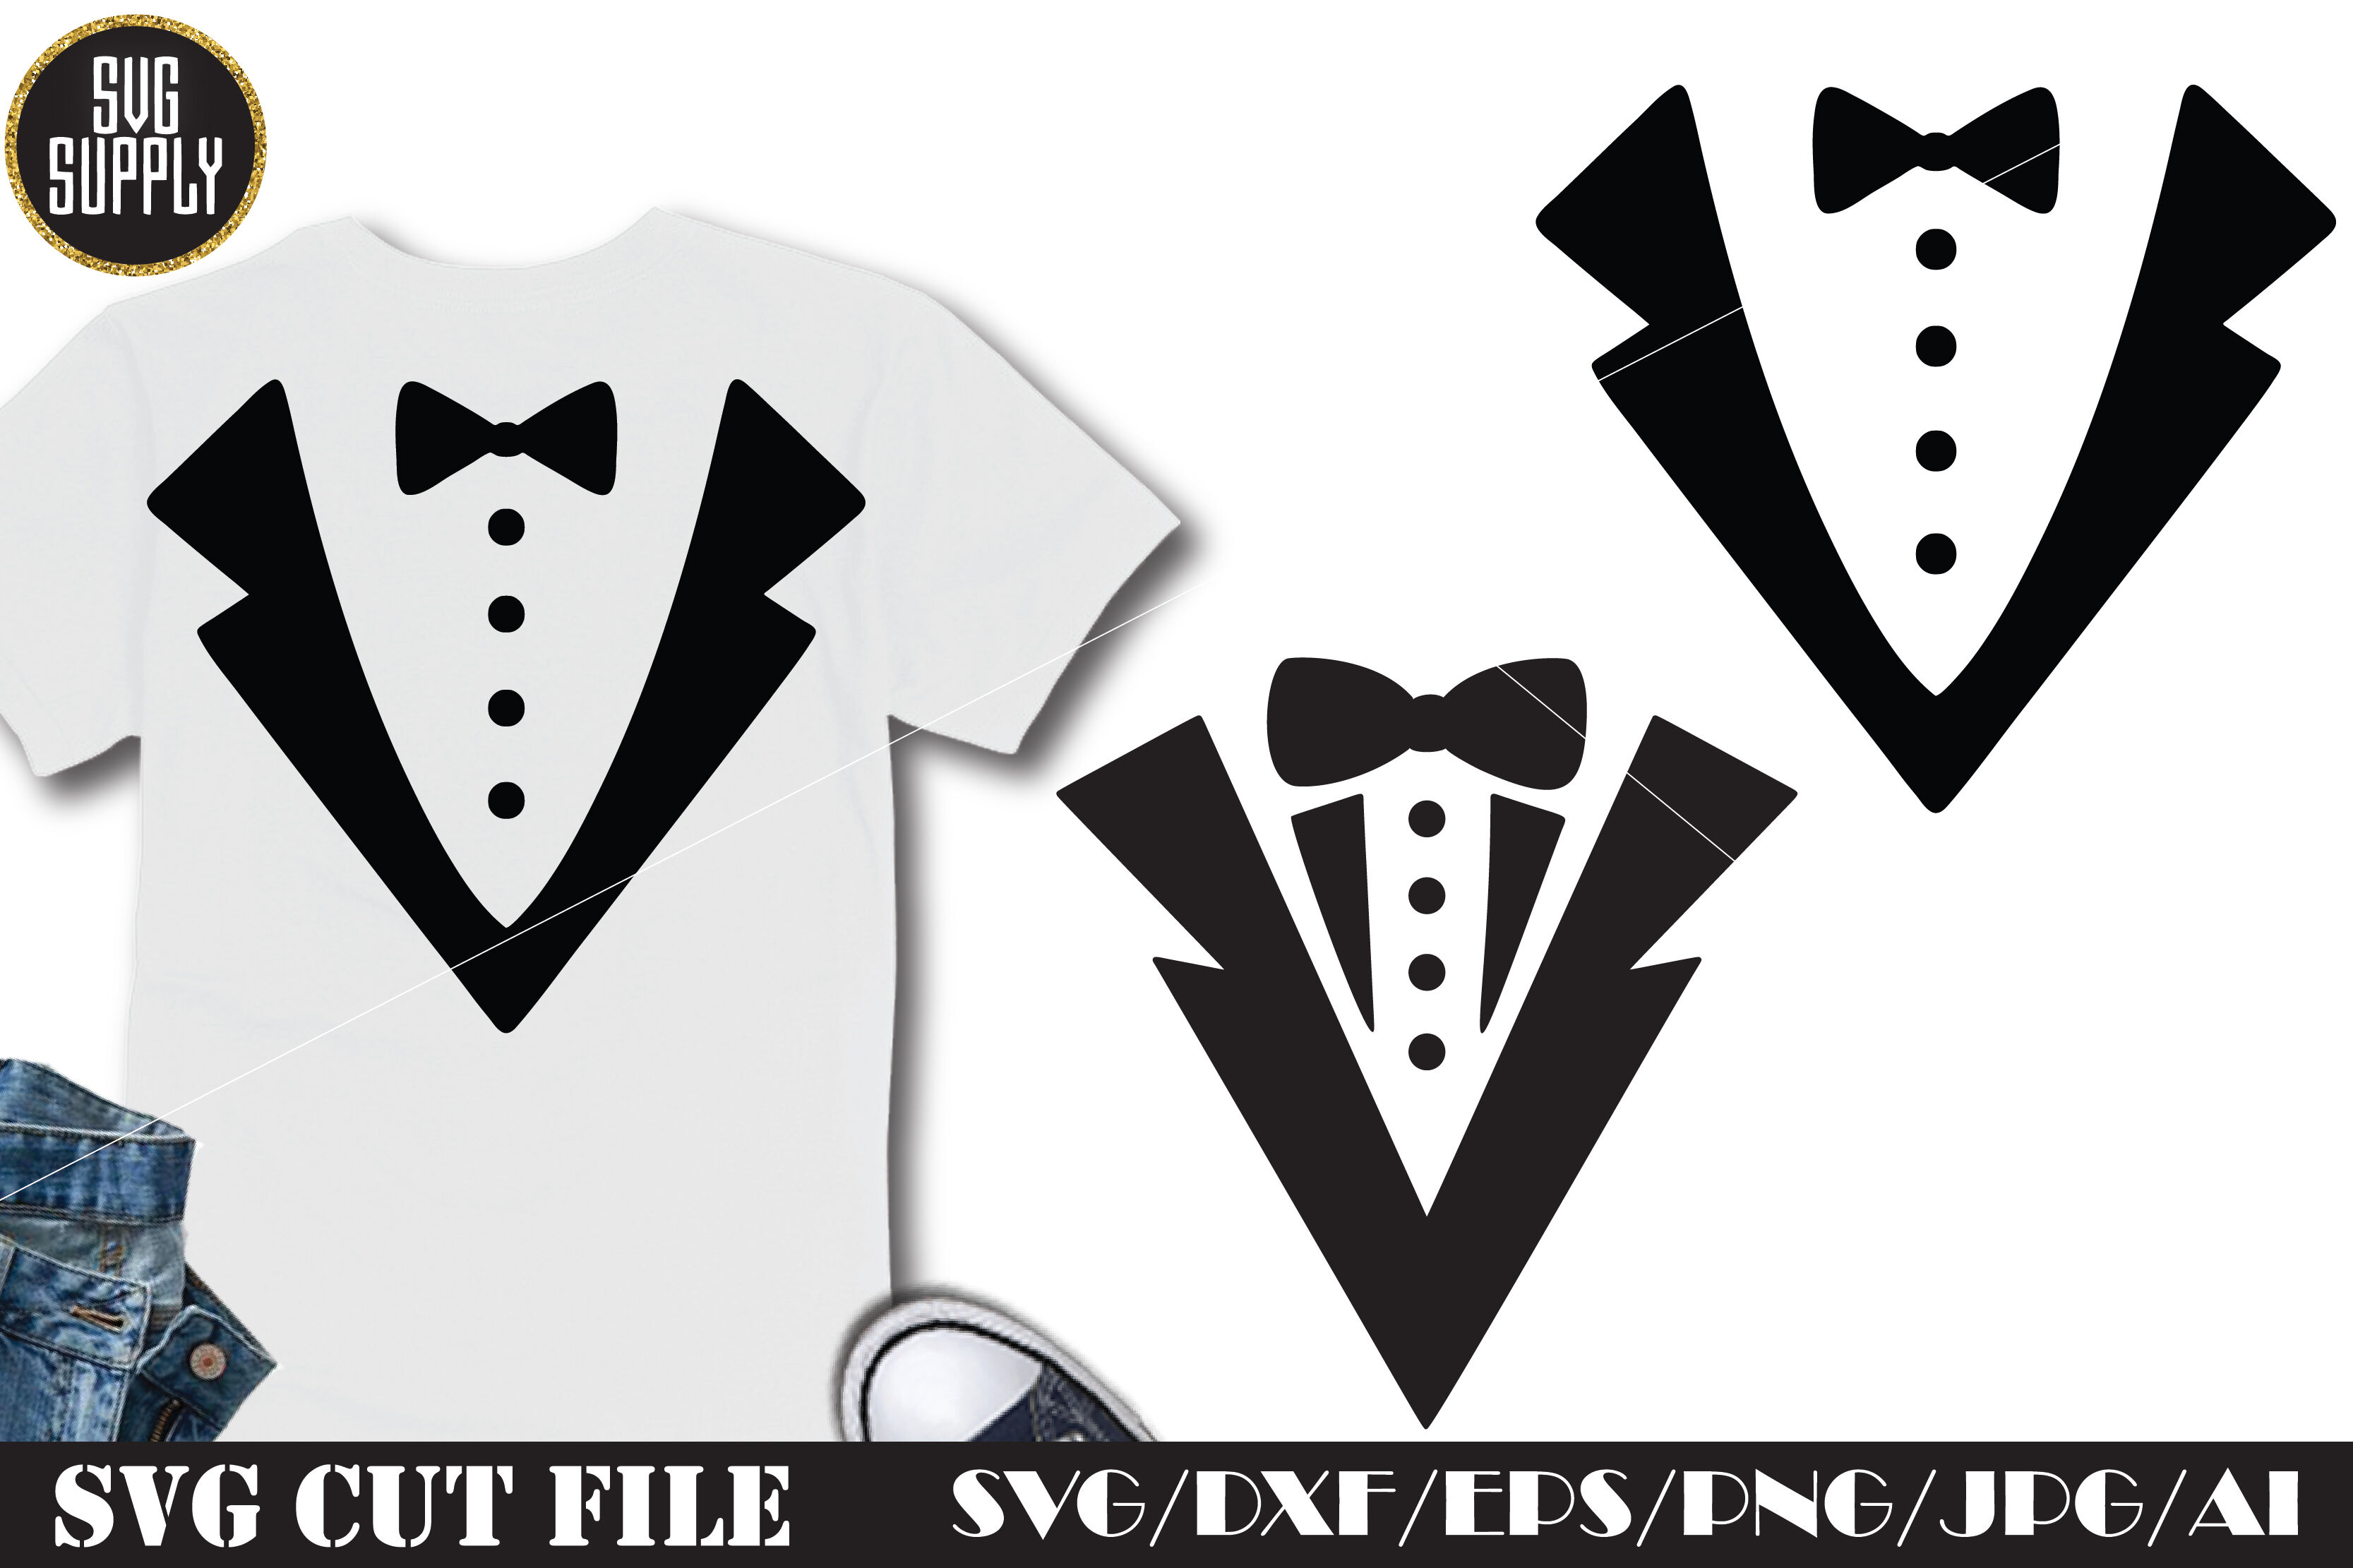 Download Free Tuxedo Svg : Free download of Tuxedo vector graphics ...